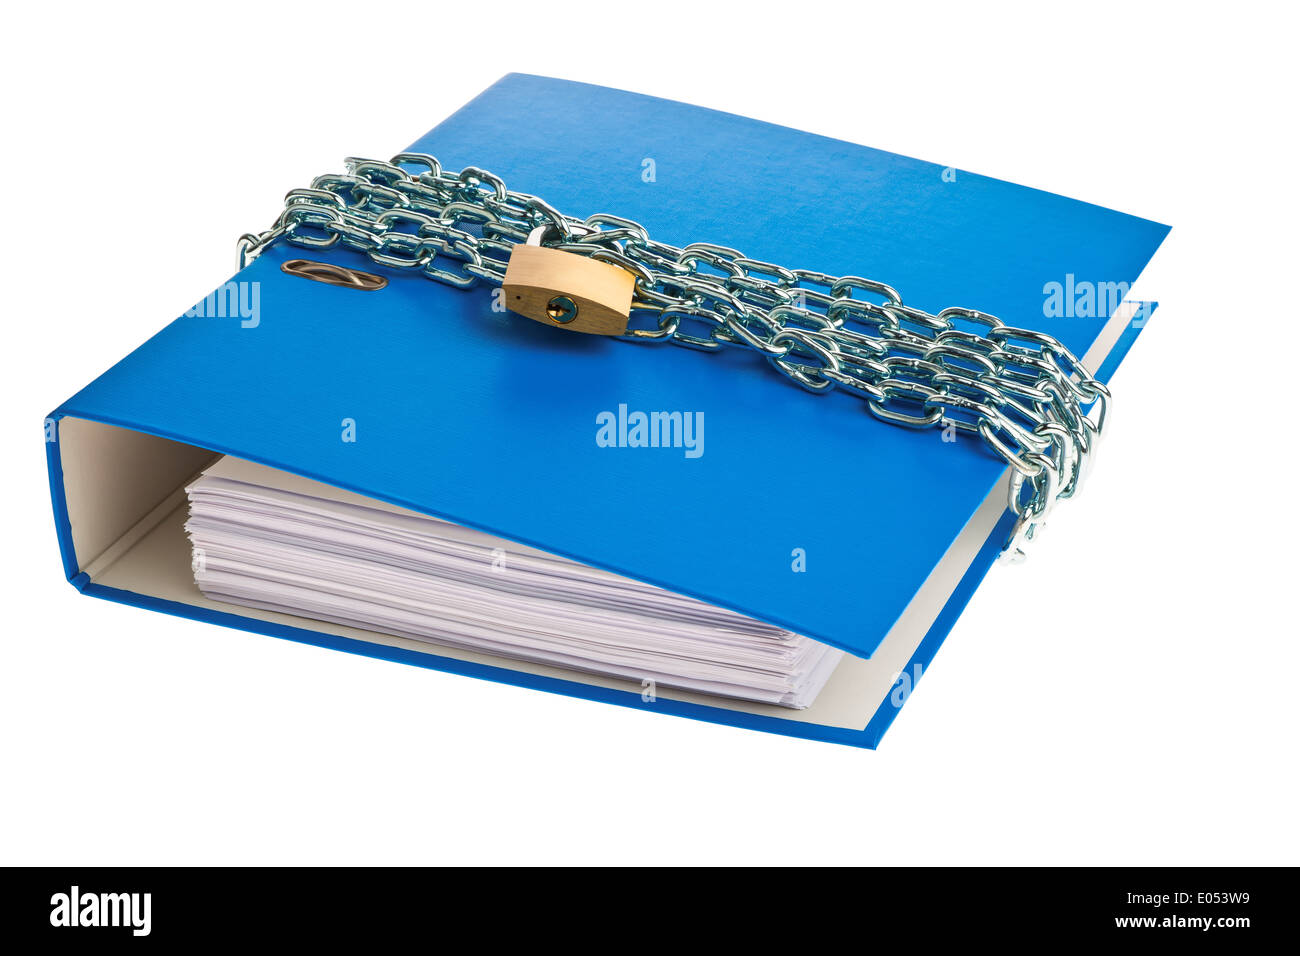 A file with chain and curtain castle closed. Data protection and data security., Ein Aktenordner mit Kette und Vorhangschloss ve Stock Photo